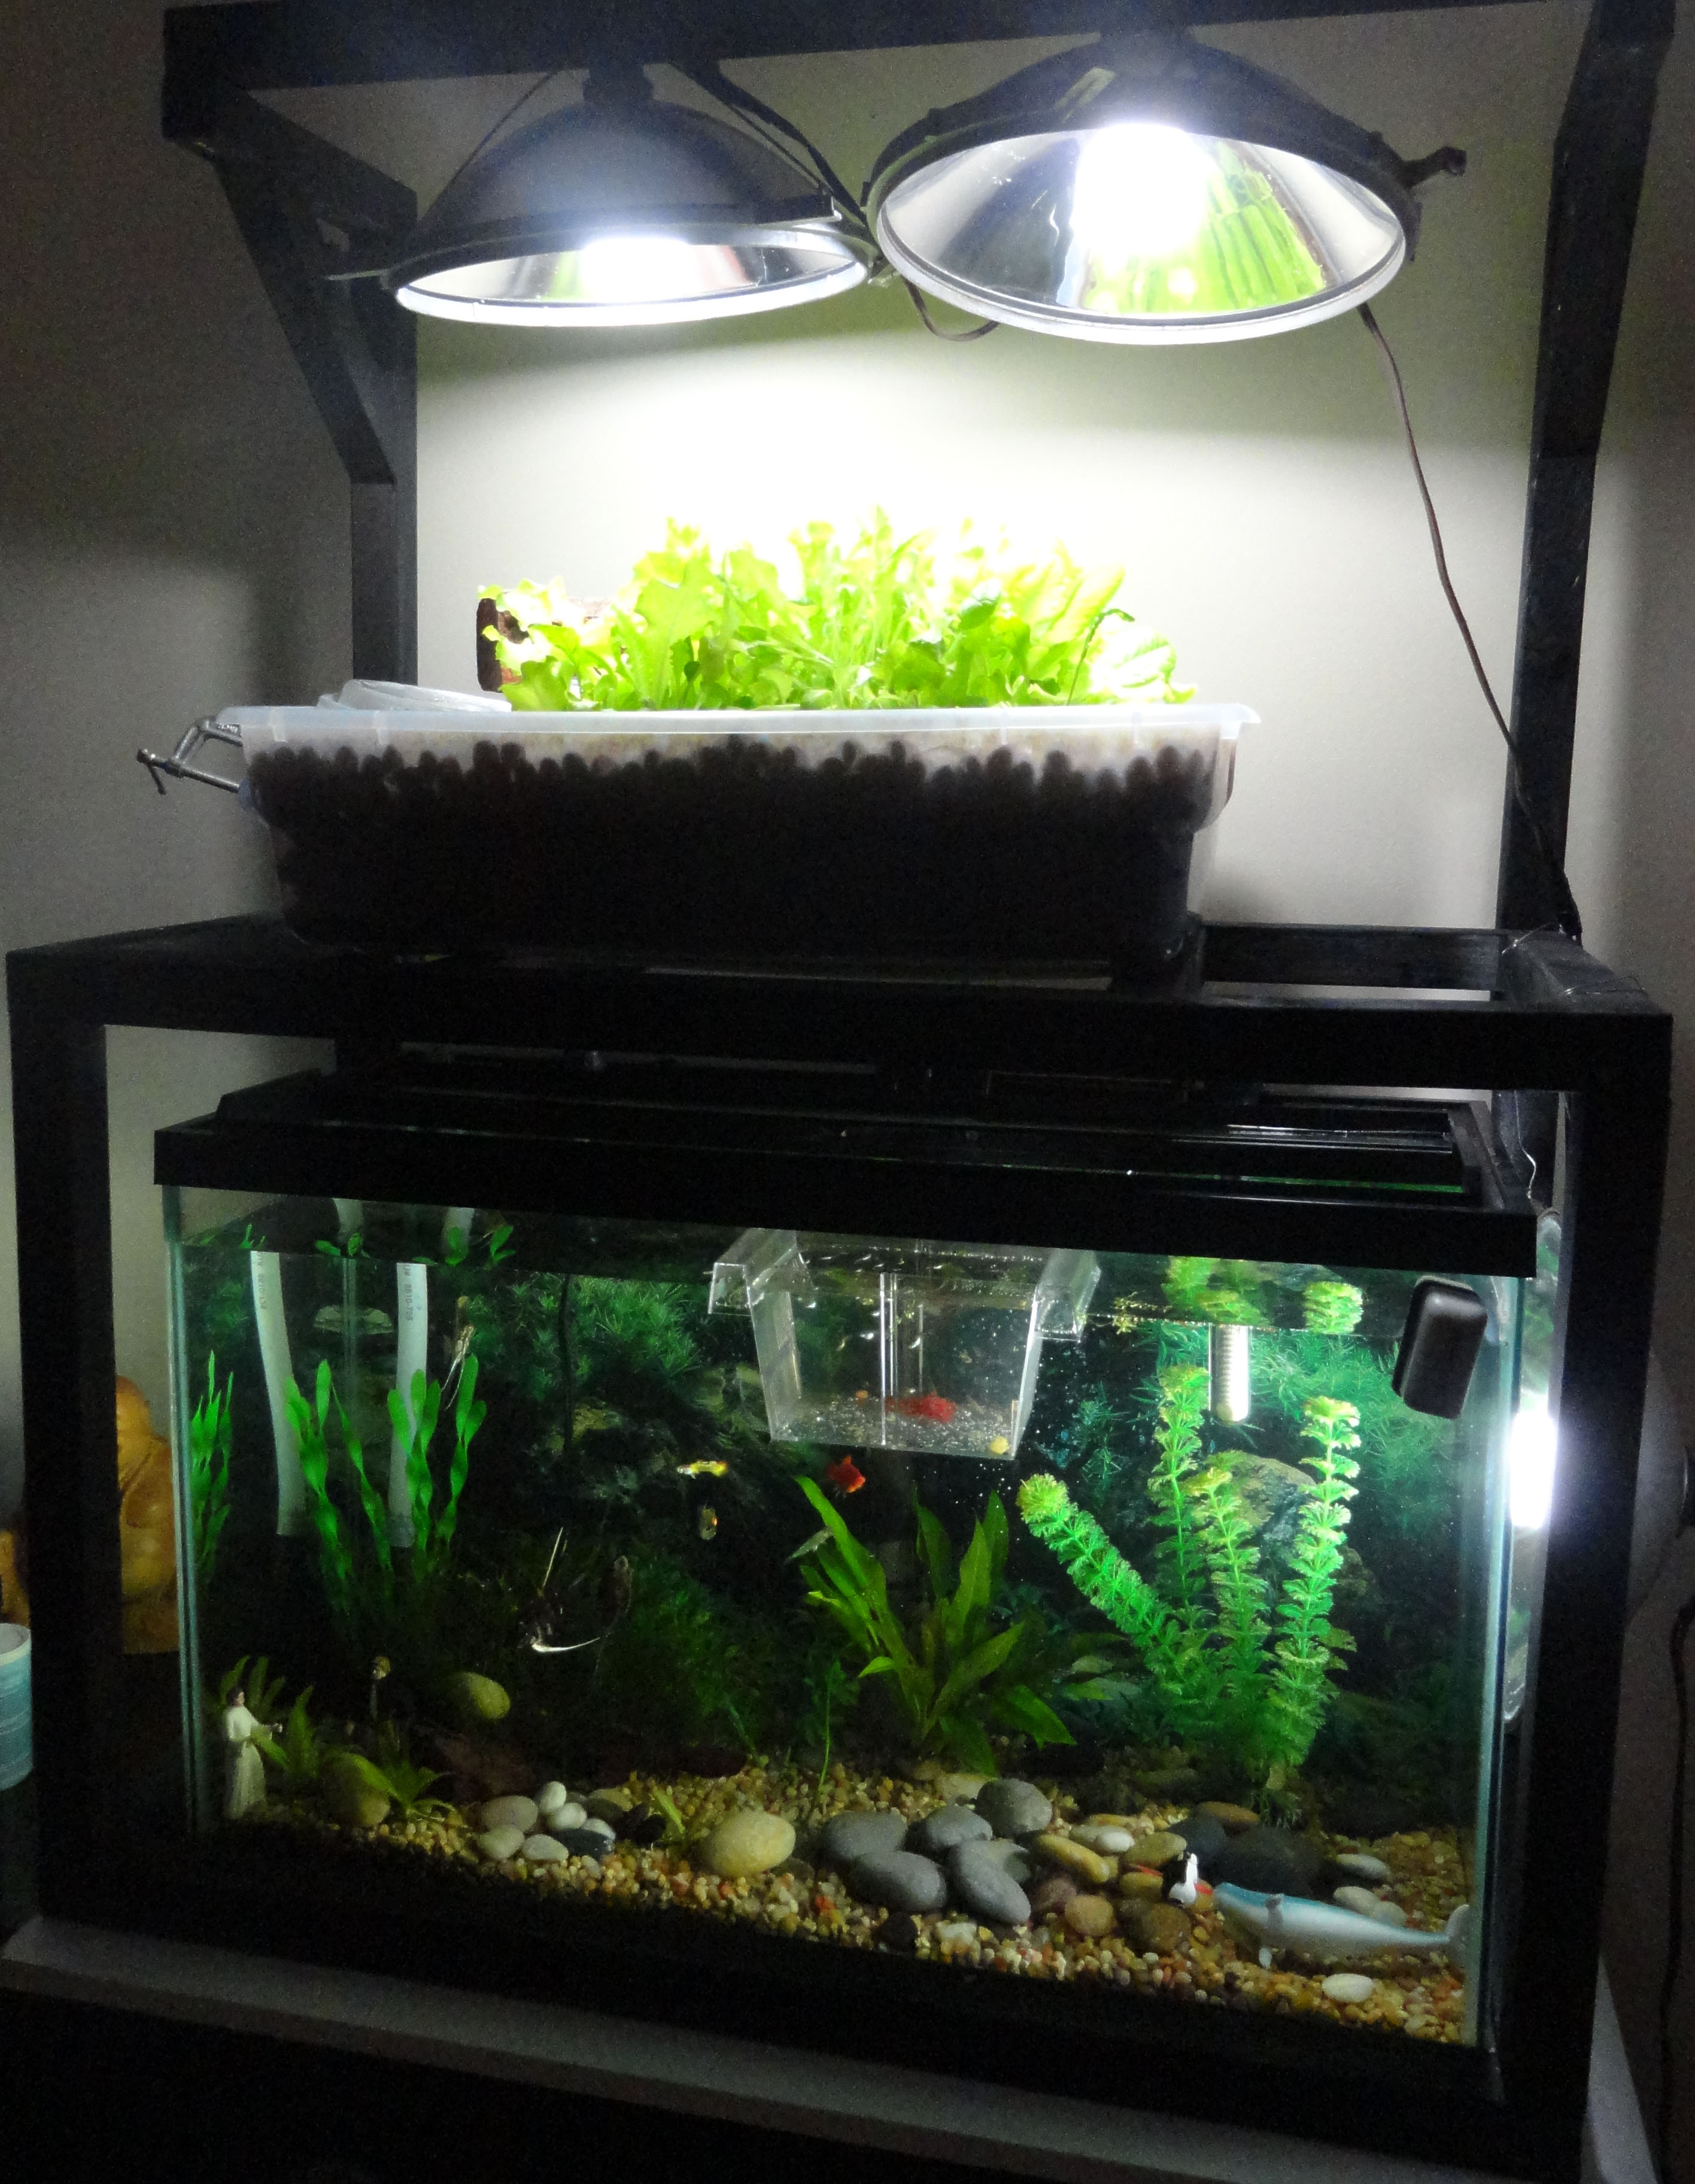 Build an Aquaponics Farm with your Fish Tank!